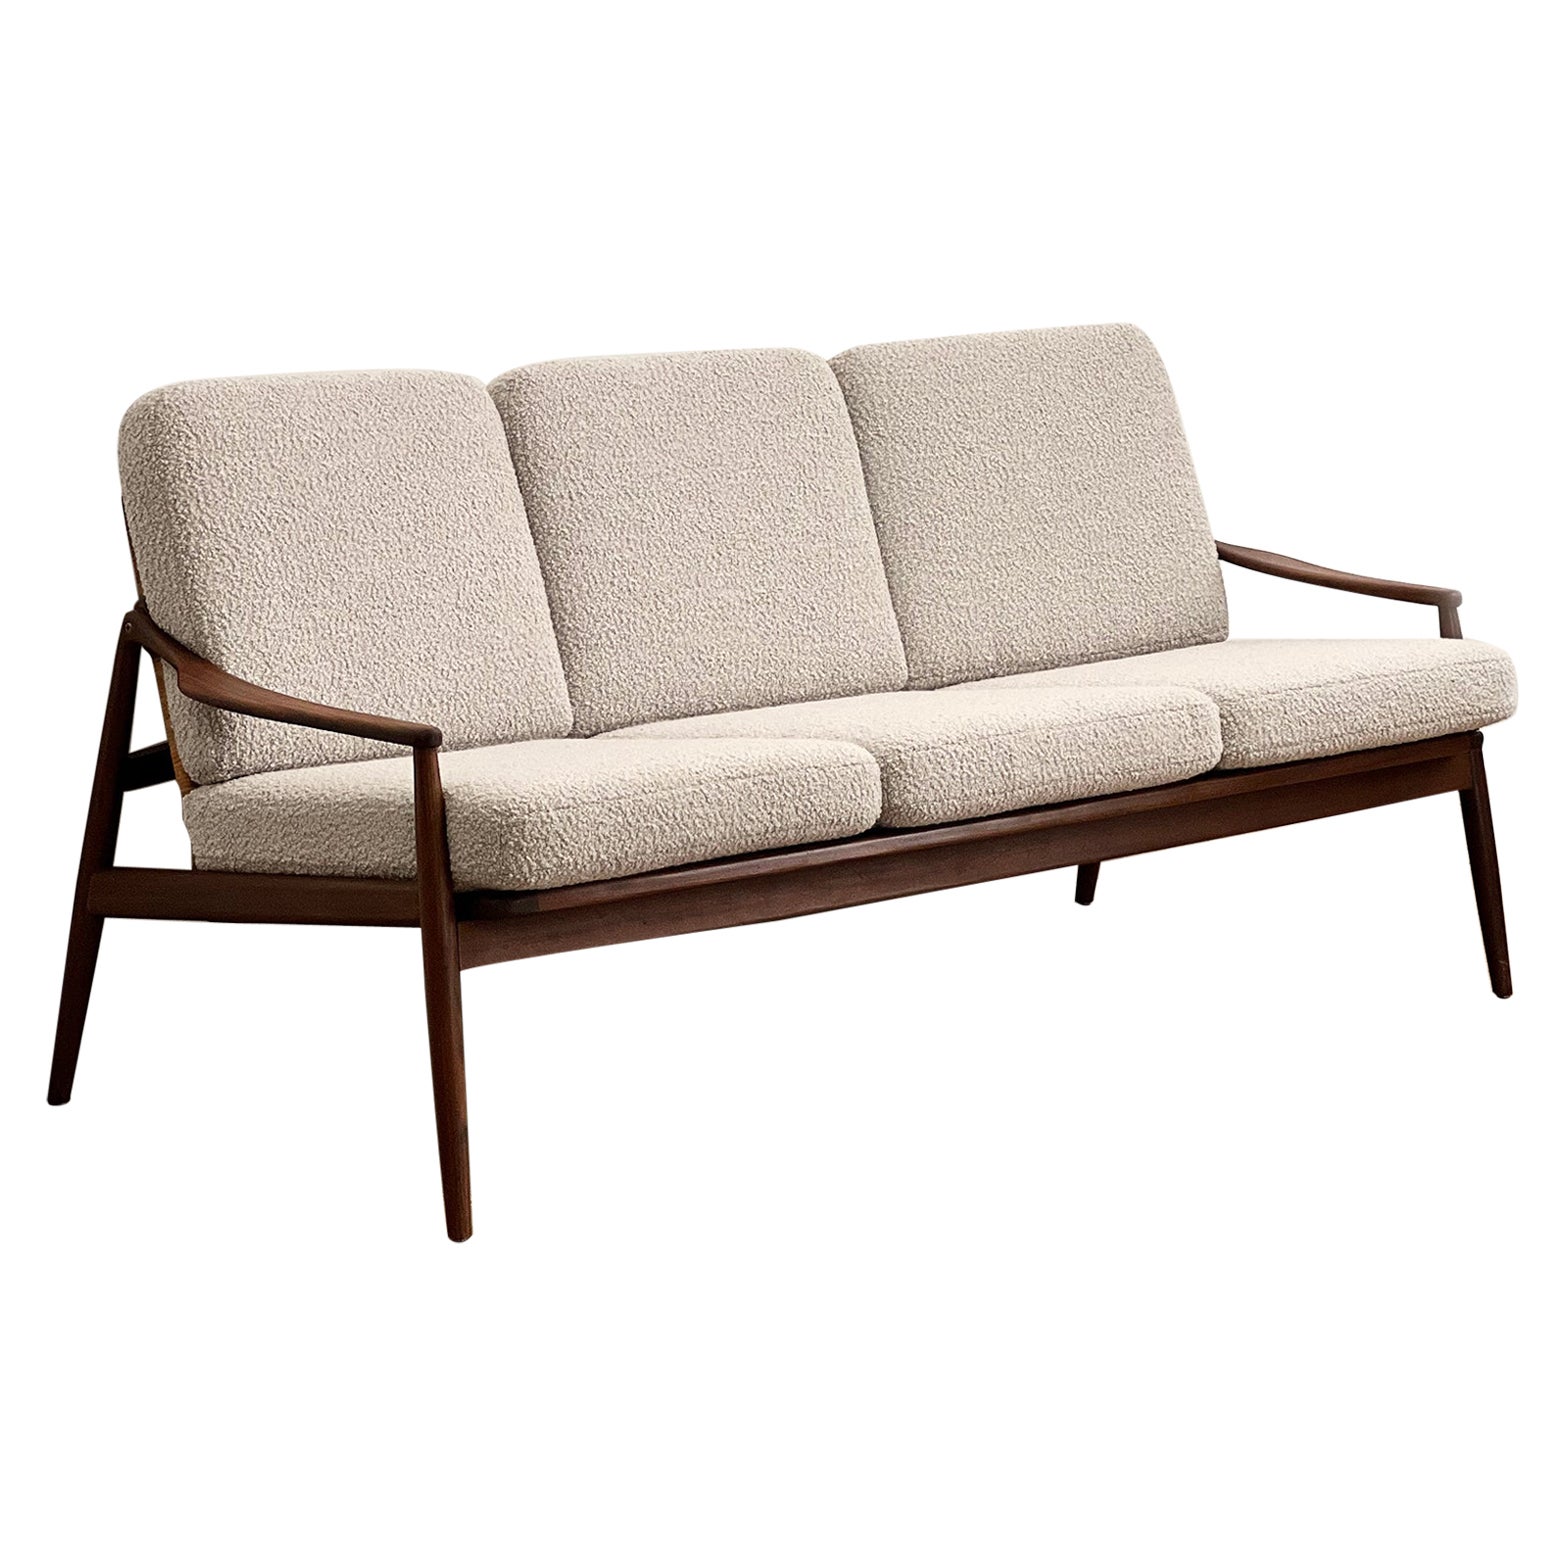 Mid-Century Teak Sofa or Couch by Hartmut Lohmeyer, German Design, 1950s For Sale